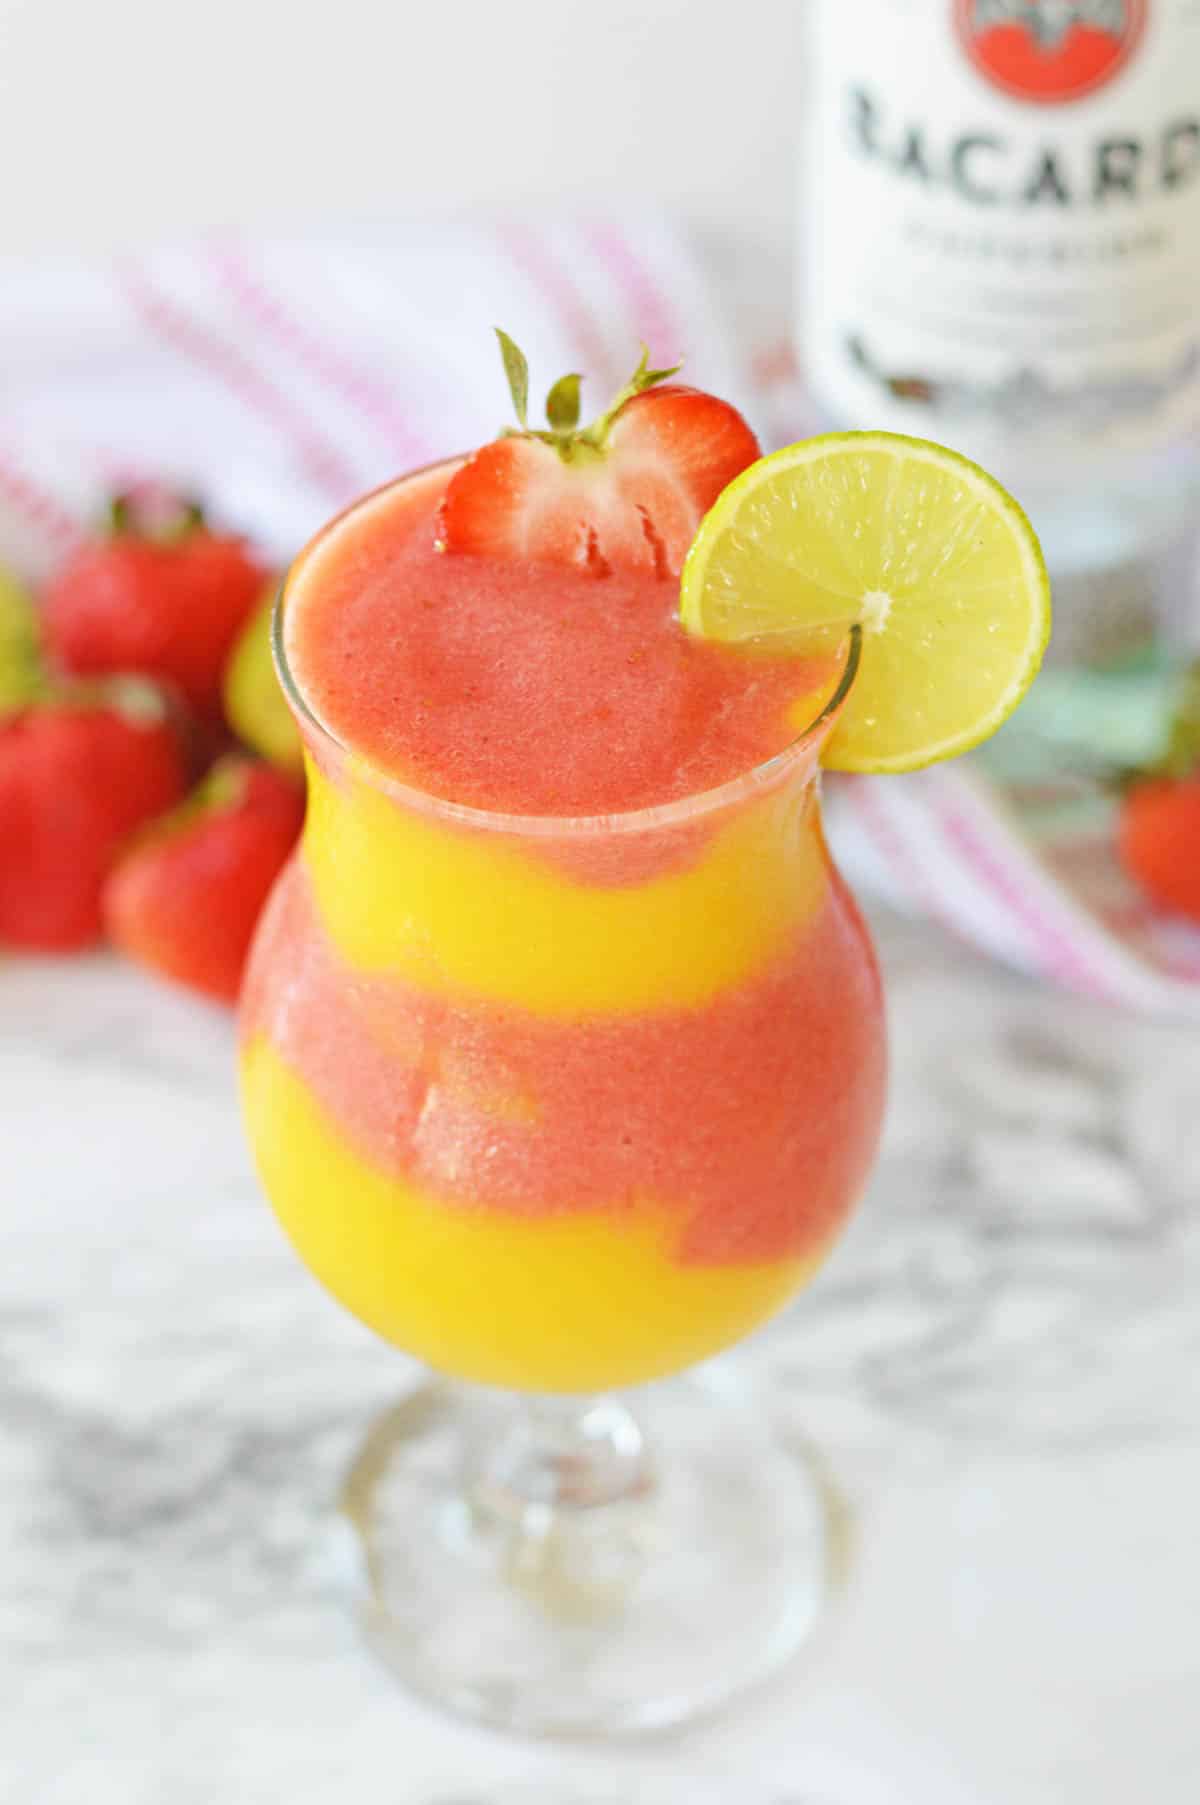 Frozen strawberry and mango layers in a hurricane glass with a strawberry and lime wheel garnish.